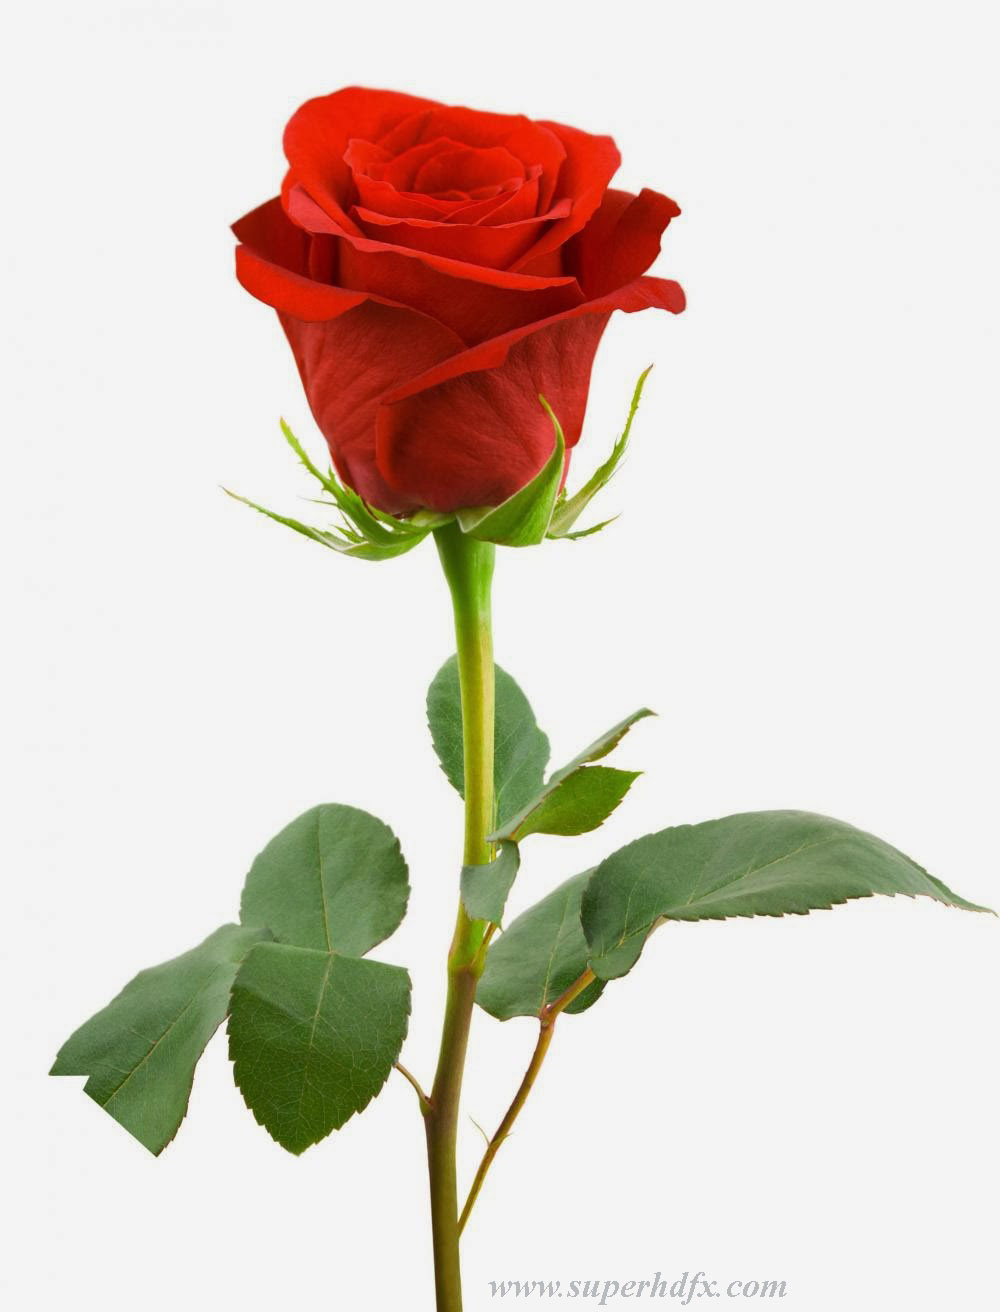 Collection of Beautiful Single Red Rose Wallpapers on HDWallpapers